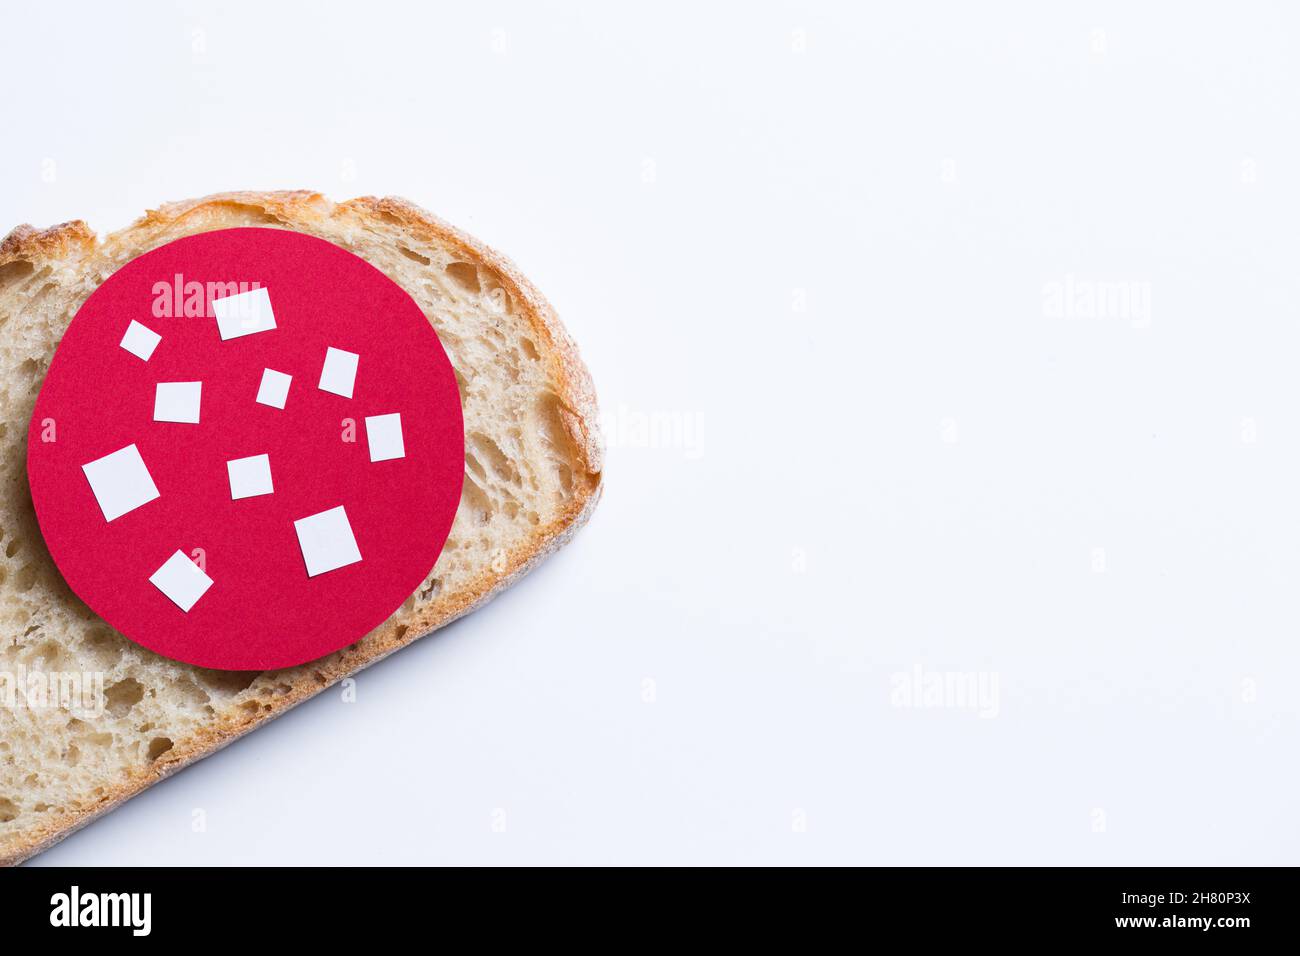 The slice of bread with paper cut out salami. Stock Photo